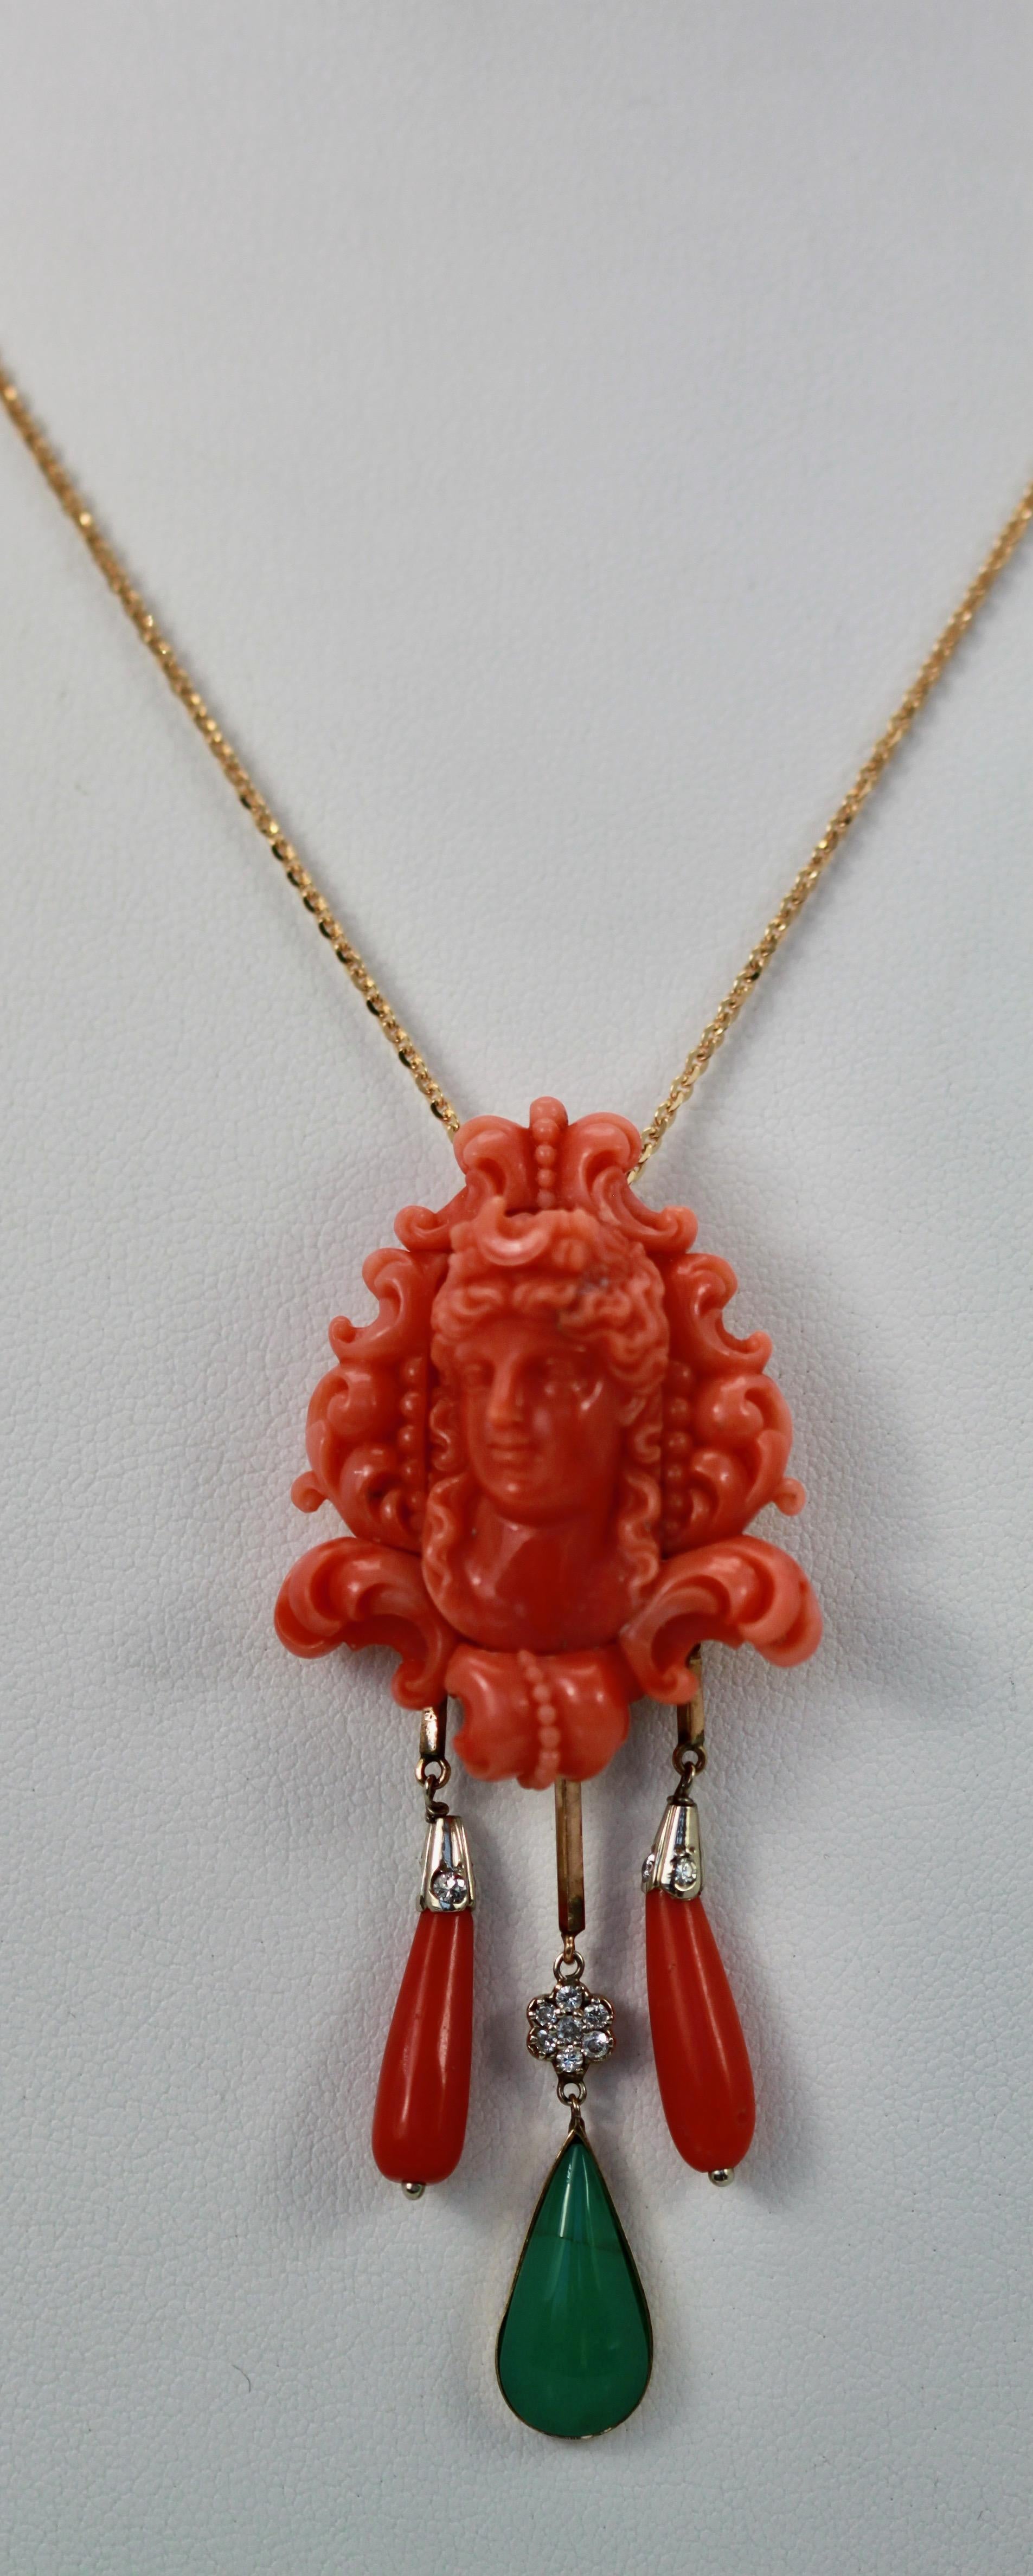 Carved Coral Brooch Pendant W/ Coral Drops and Crystophase Drop For Sale 2